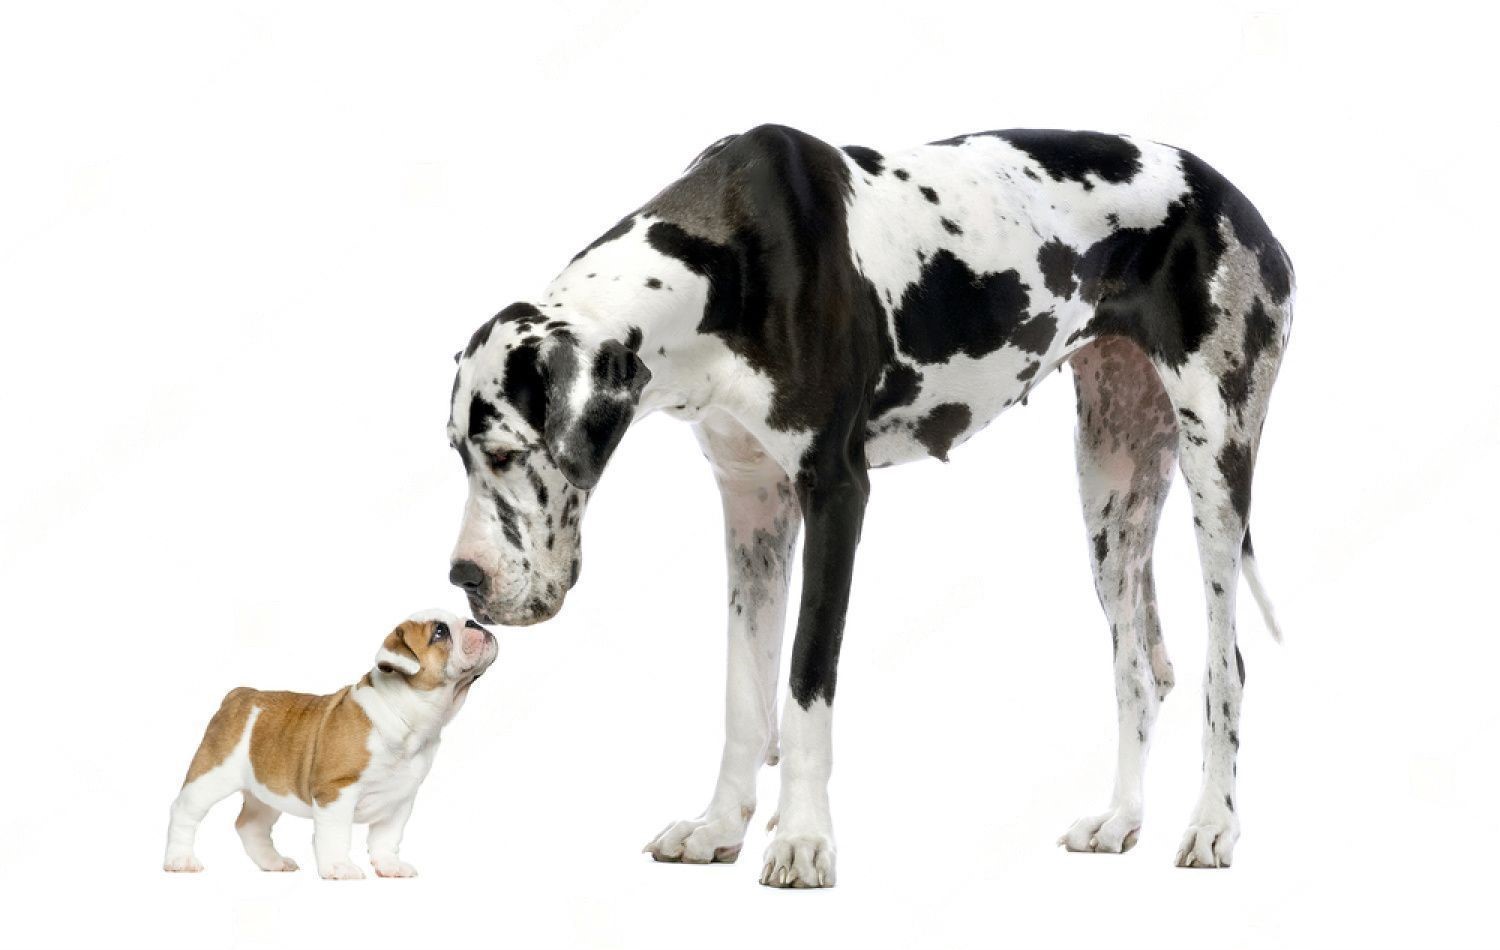 Reasons Why Big Dogs are Nicer Than Small Dogs